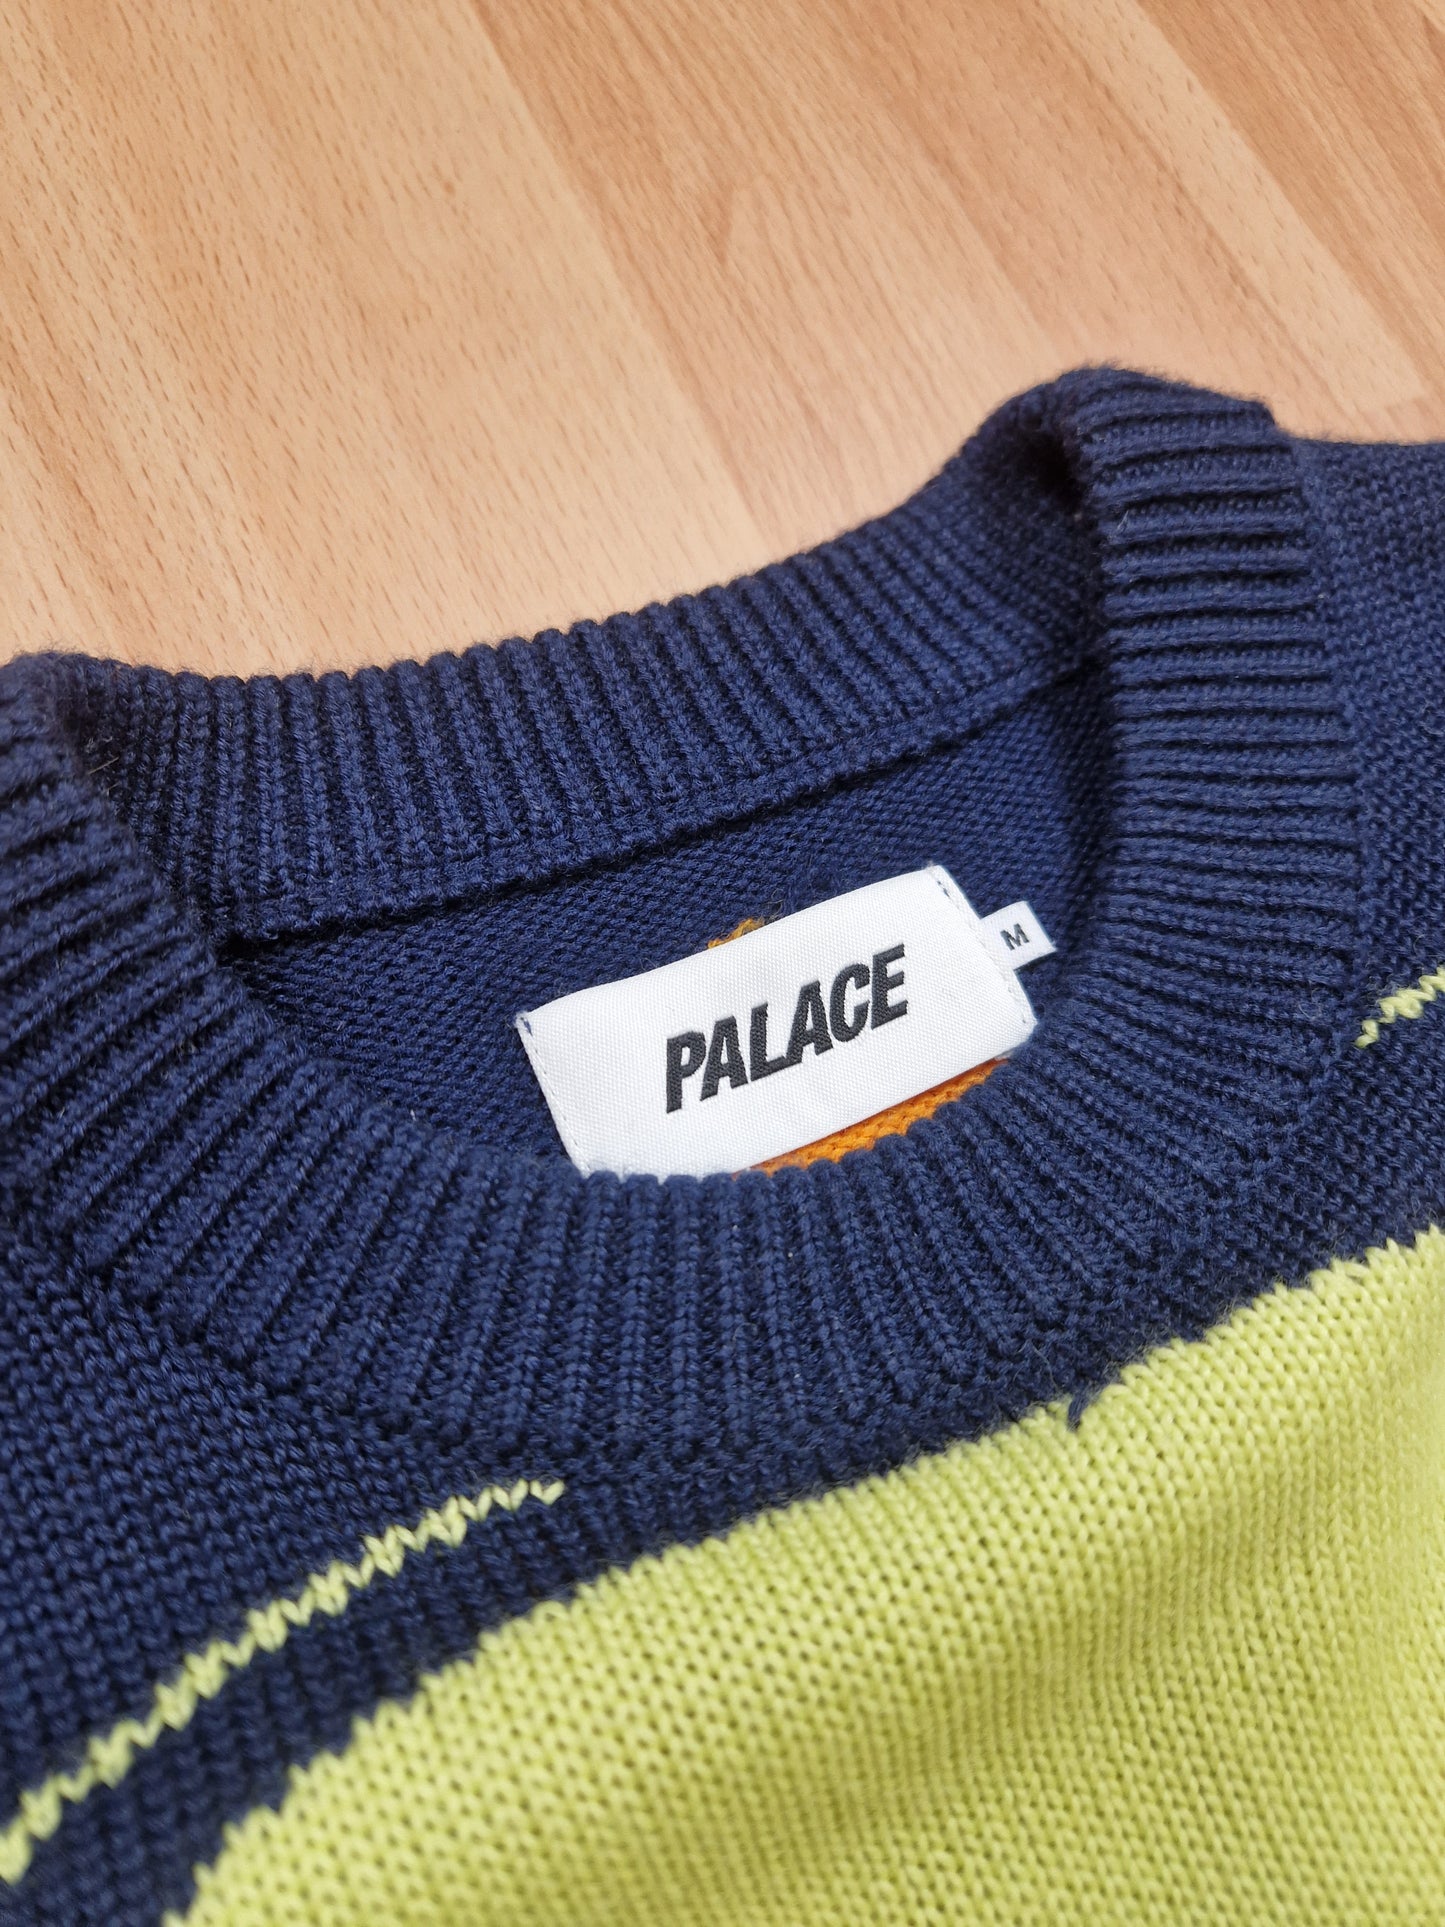 RARE Palace 'As You Like It' Shakespeare Knit Sweater (M)